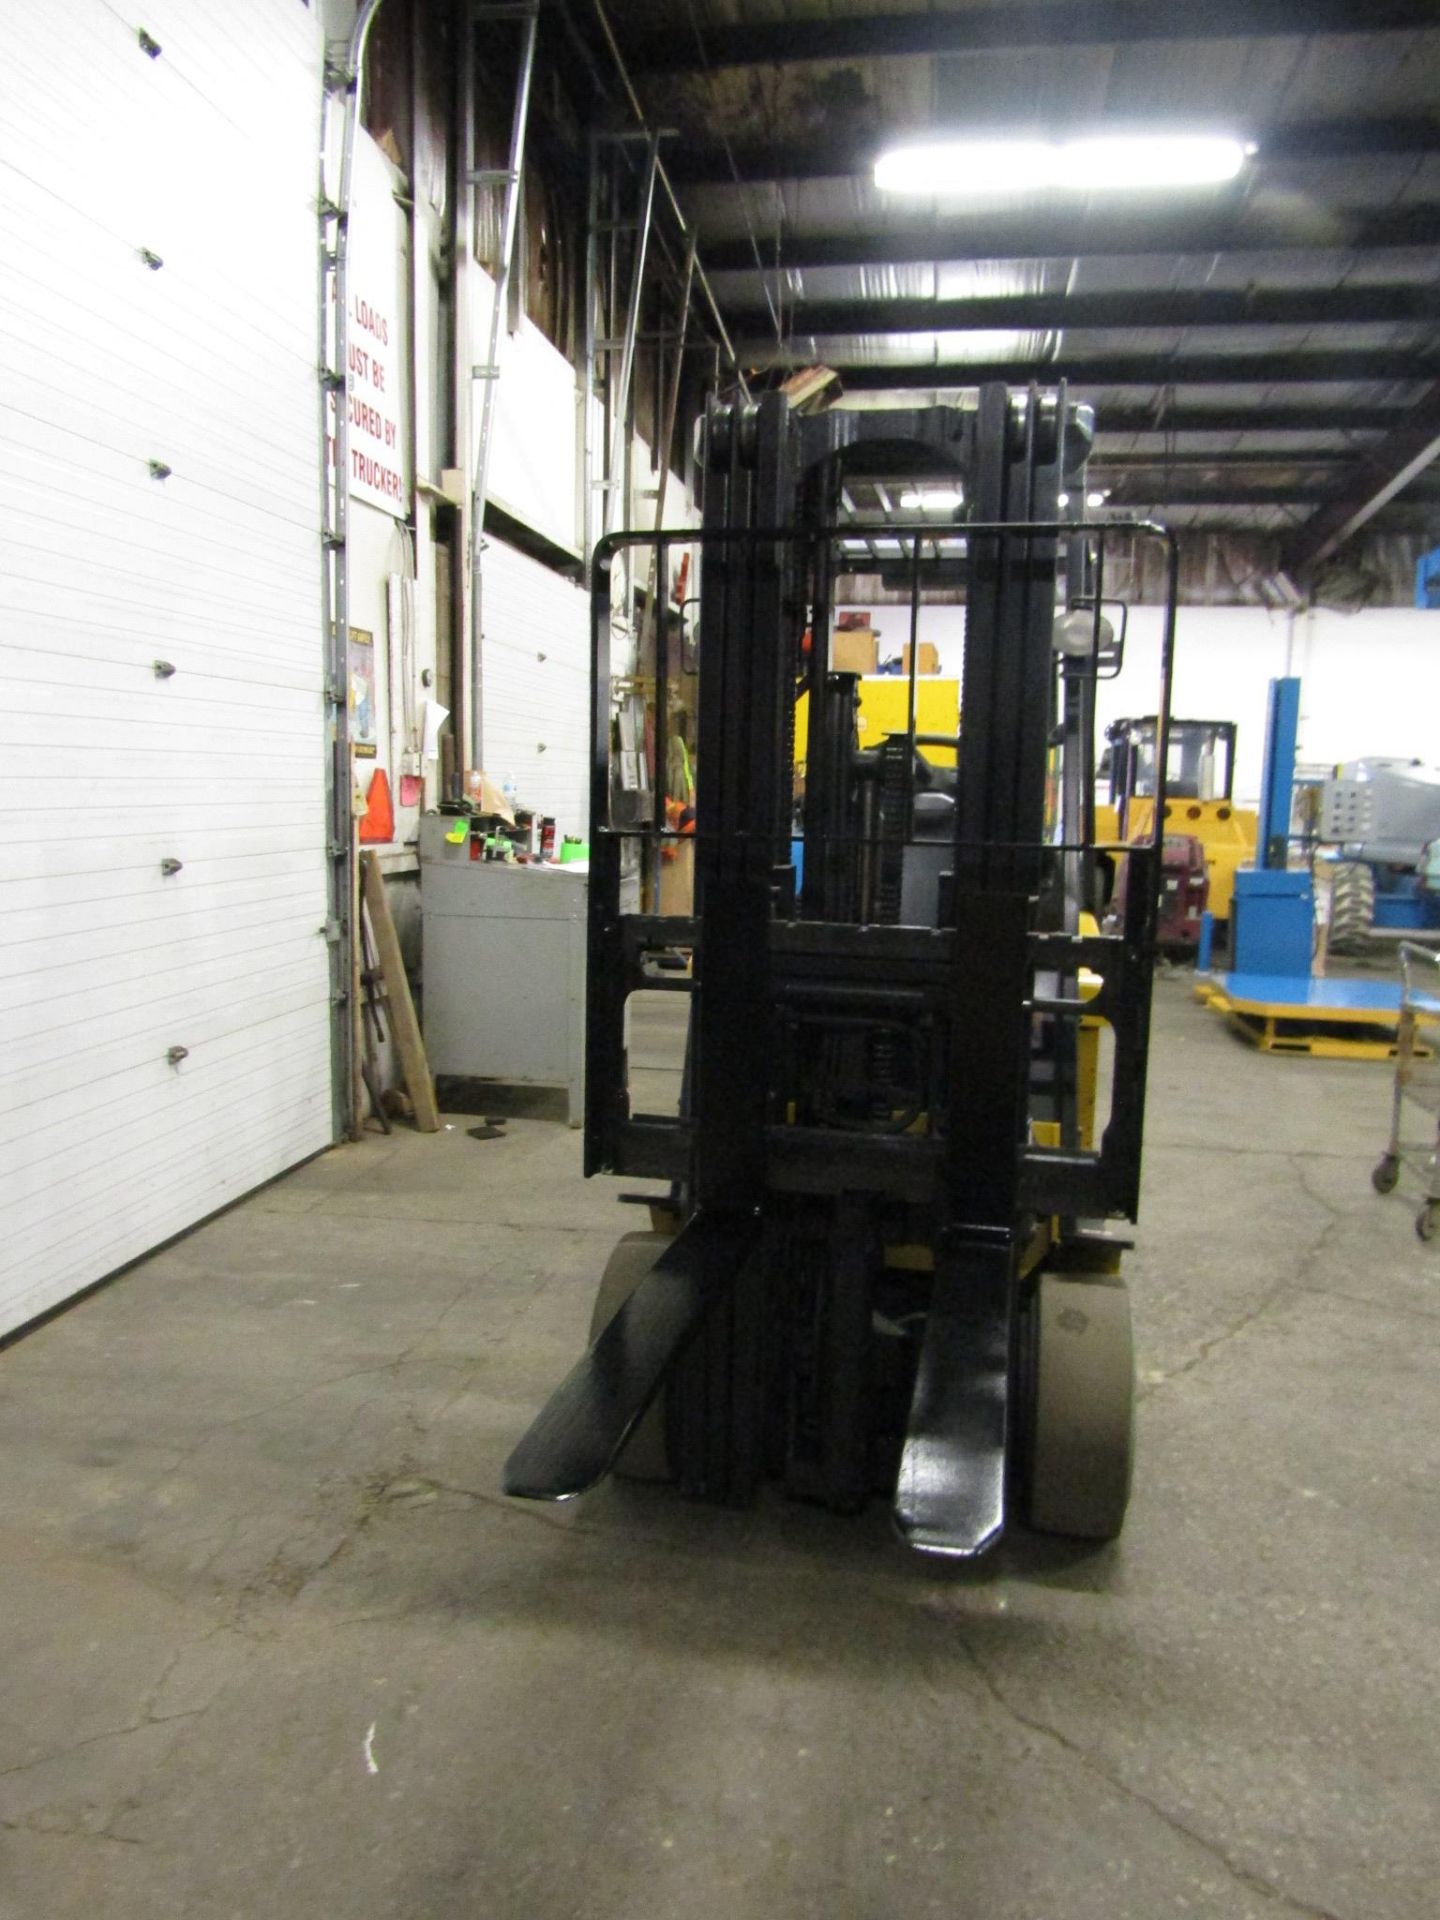 2006 Yale 6000lbs Capacity Electric Forklift with sideshift and 3-stage mast - Image 2 of 2